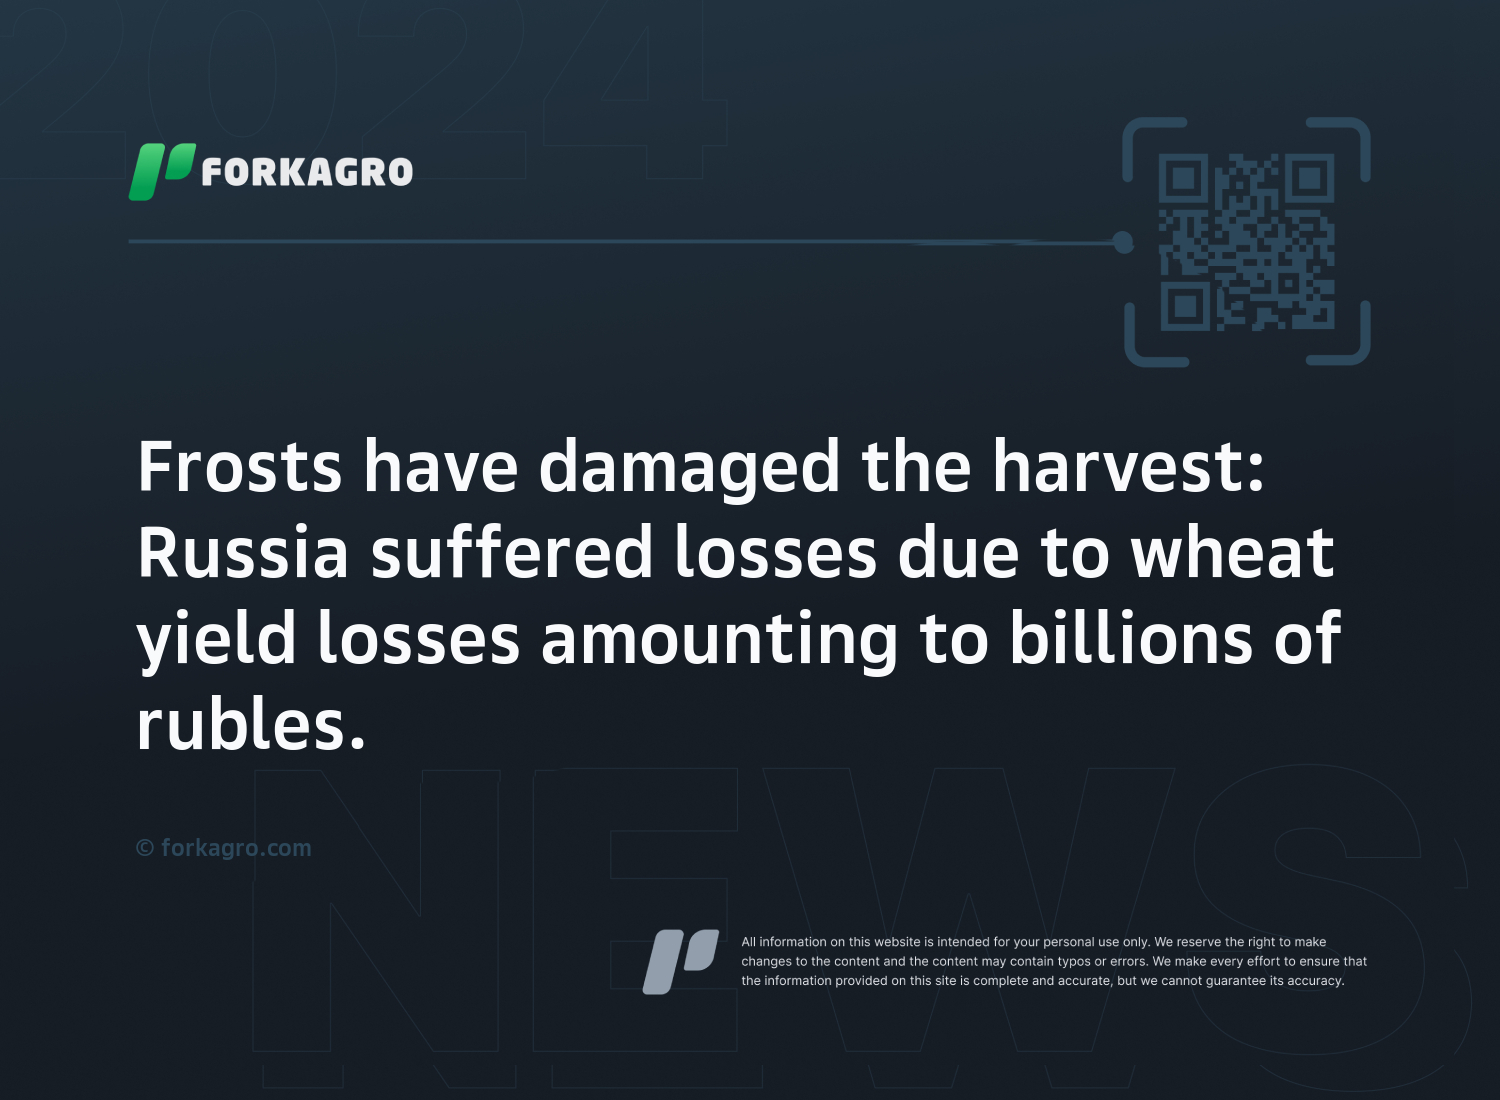 Frosts have damaged the harvest: Russia suffered losses due to wheat yield losses amounting to billions of rubles.